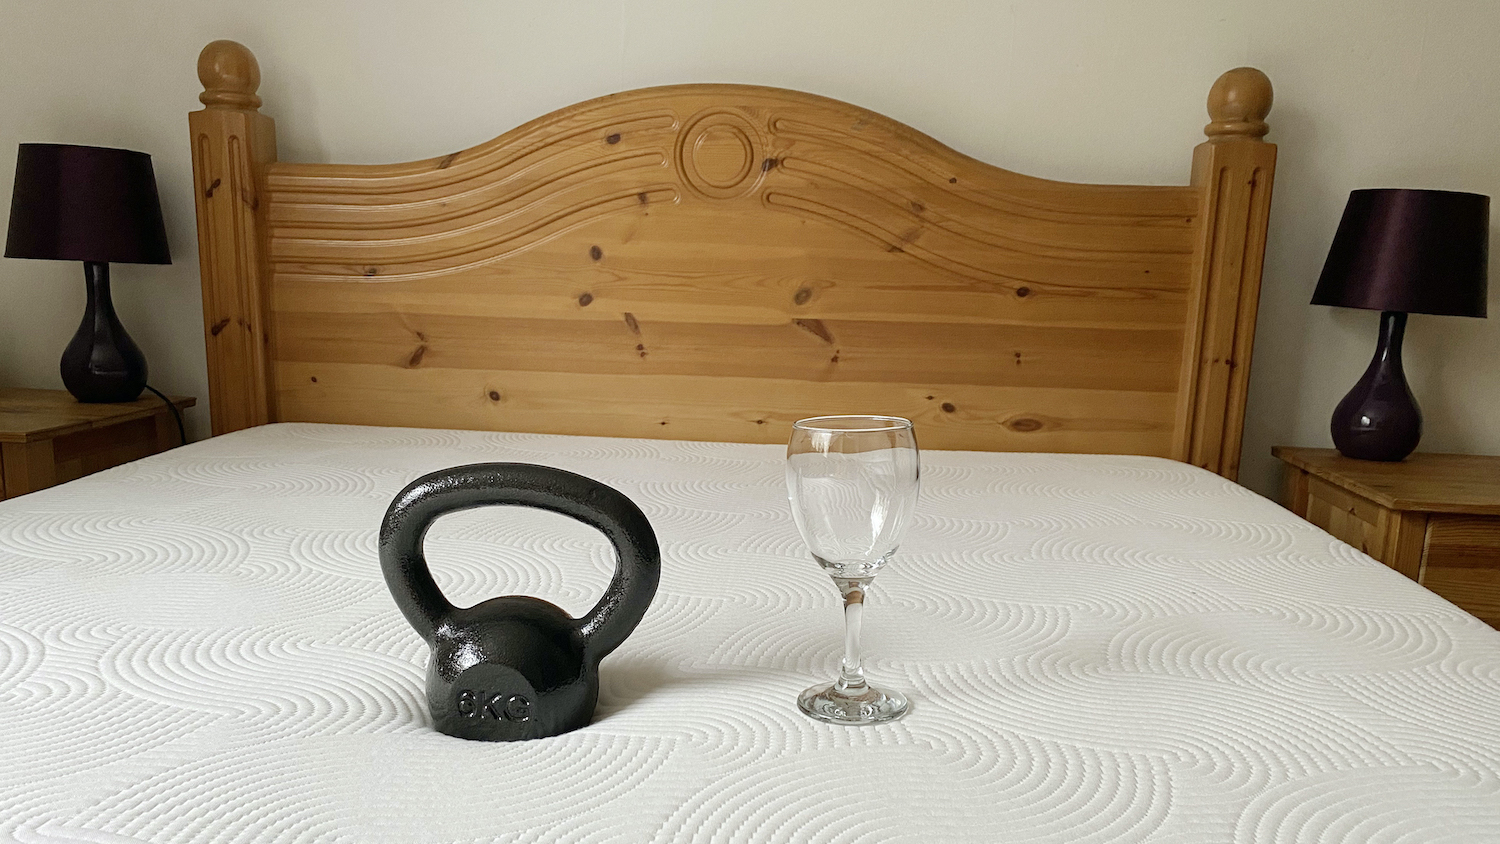 A 6kg black weight is dropped near an empty wine glass on the Brook + Wilde Lux Mattress during the review process to test motion isolation